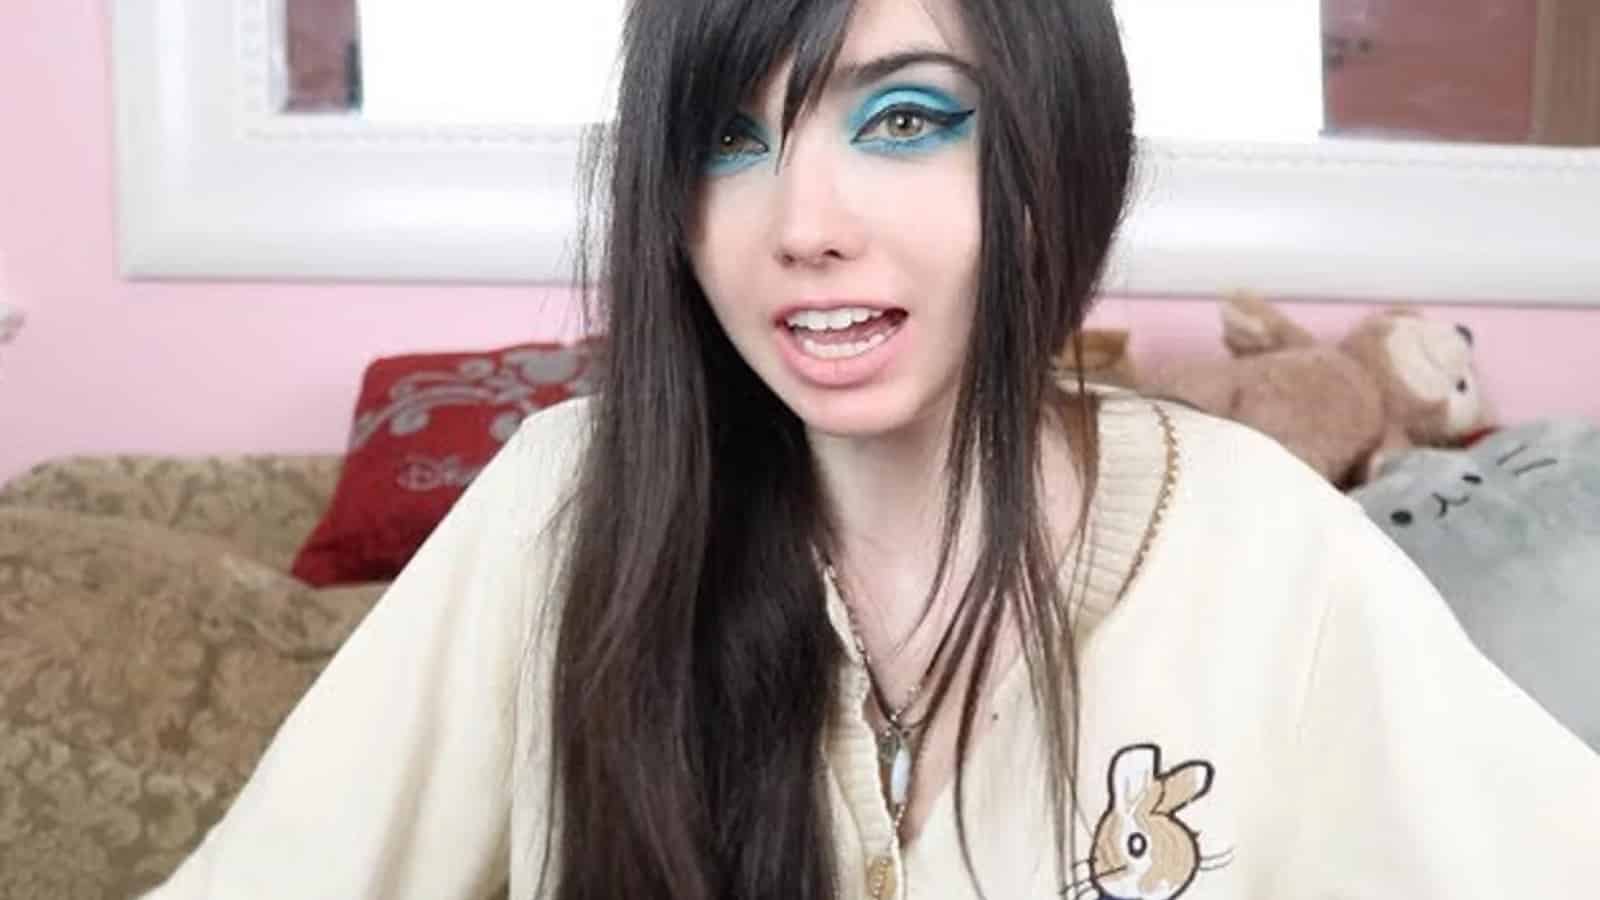 AN image of Eugenia Cooney